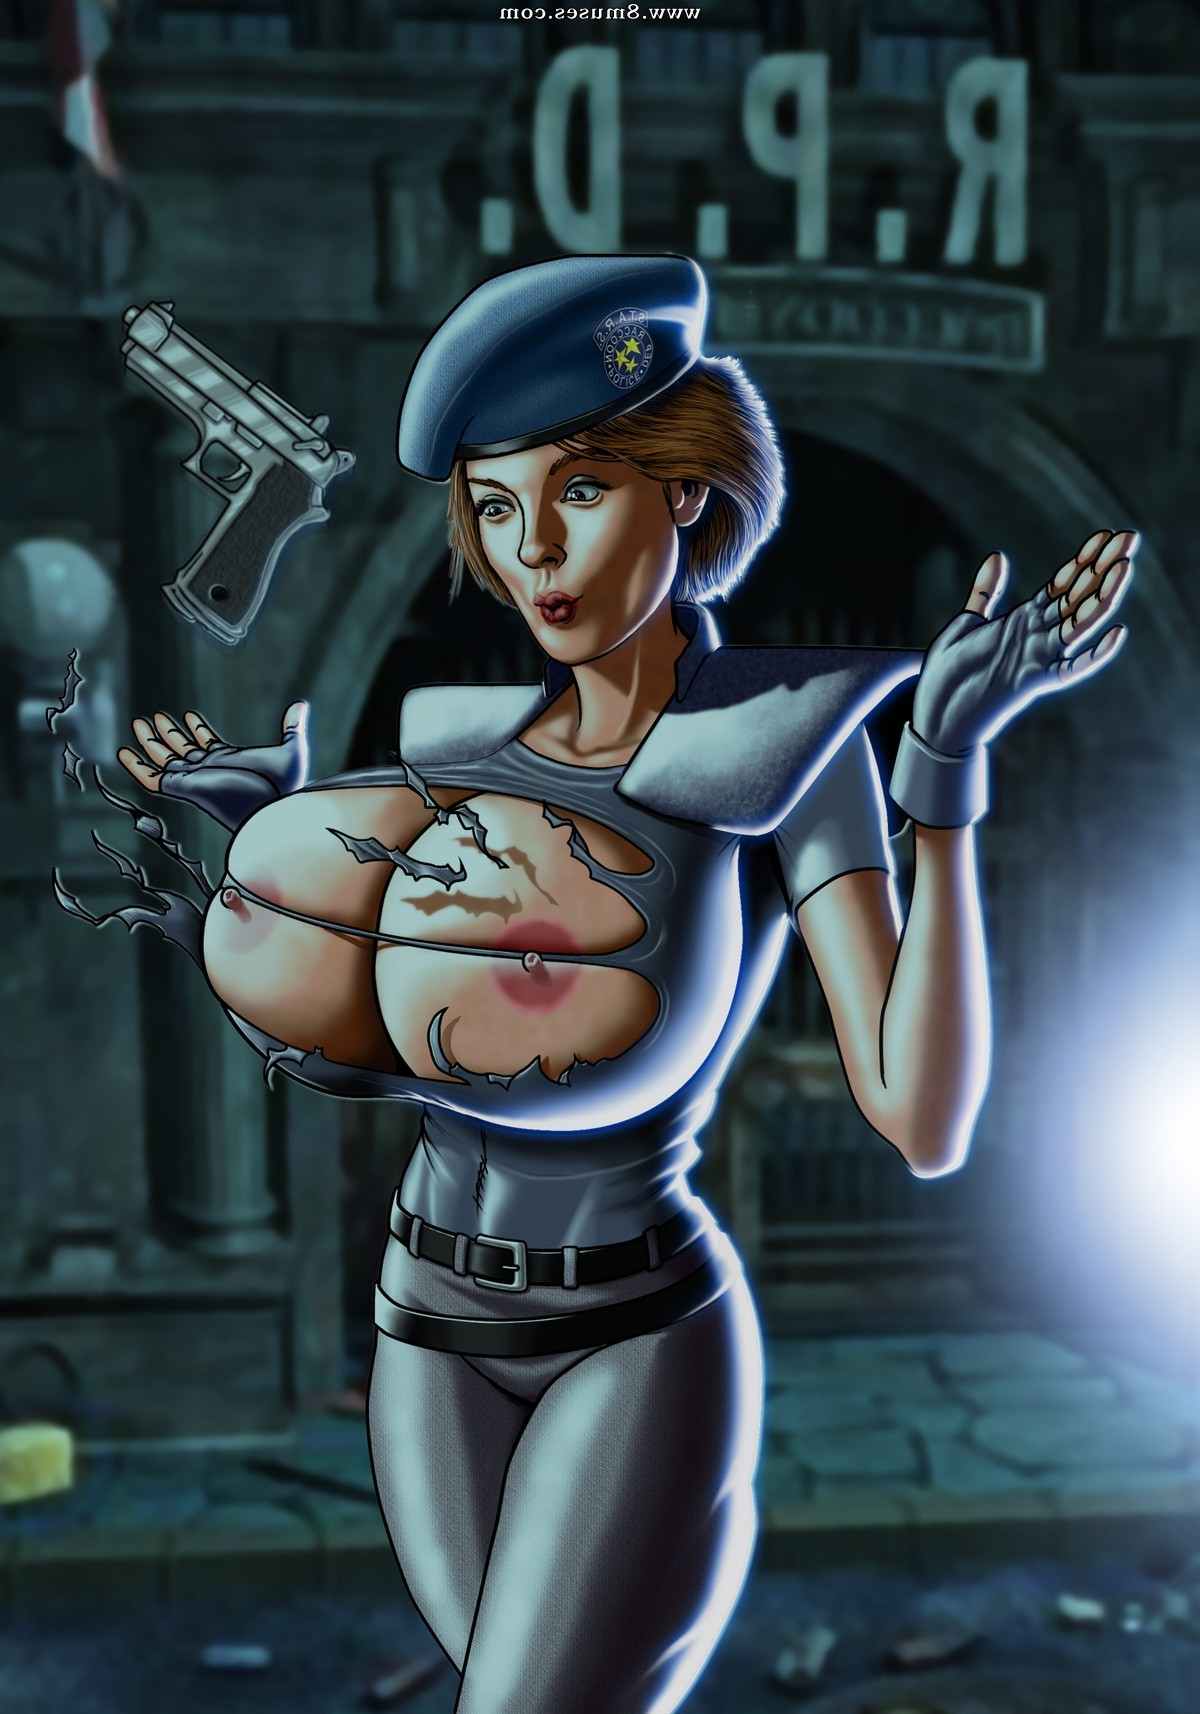 Expansionfan-Comics/Pinup-Gallery Pinup_Gallery__8muses_-_Sex_and_Porn_Comics_24.jpg